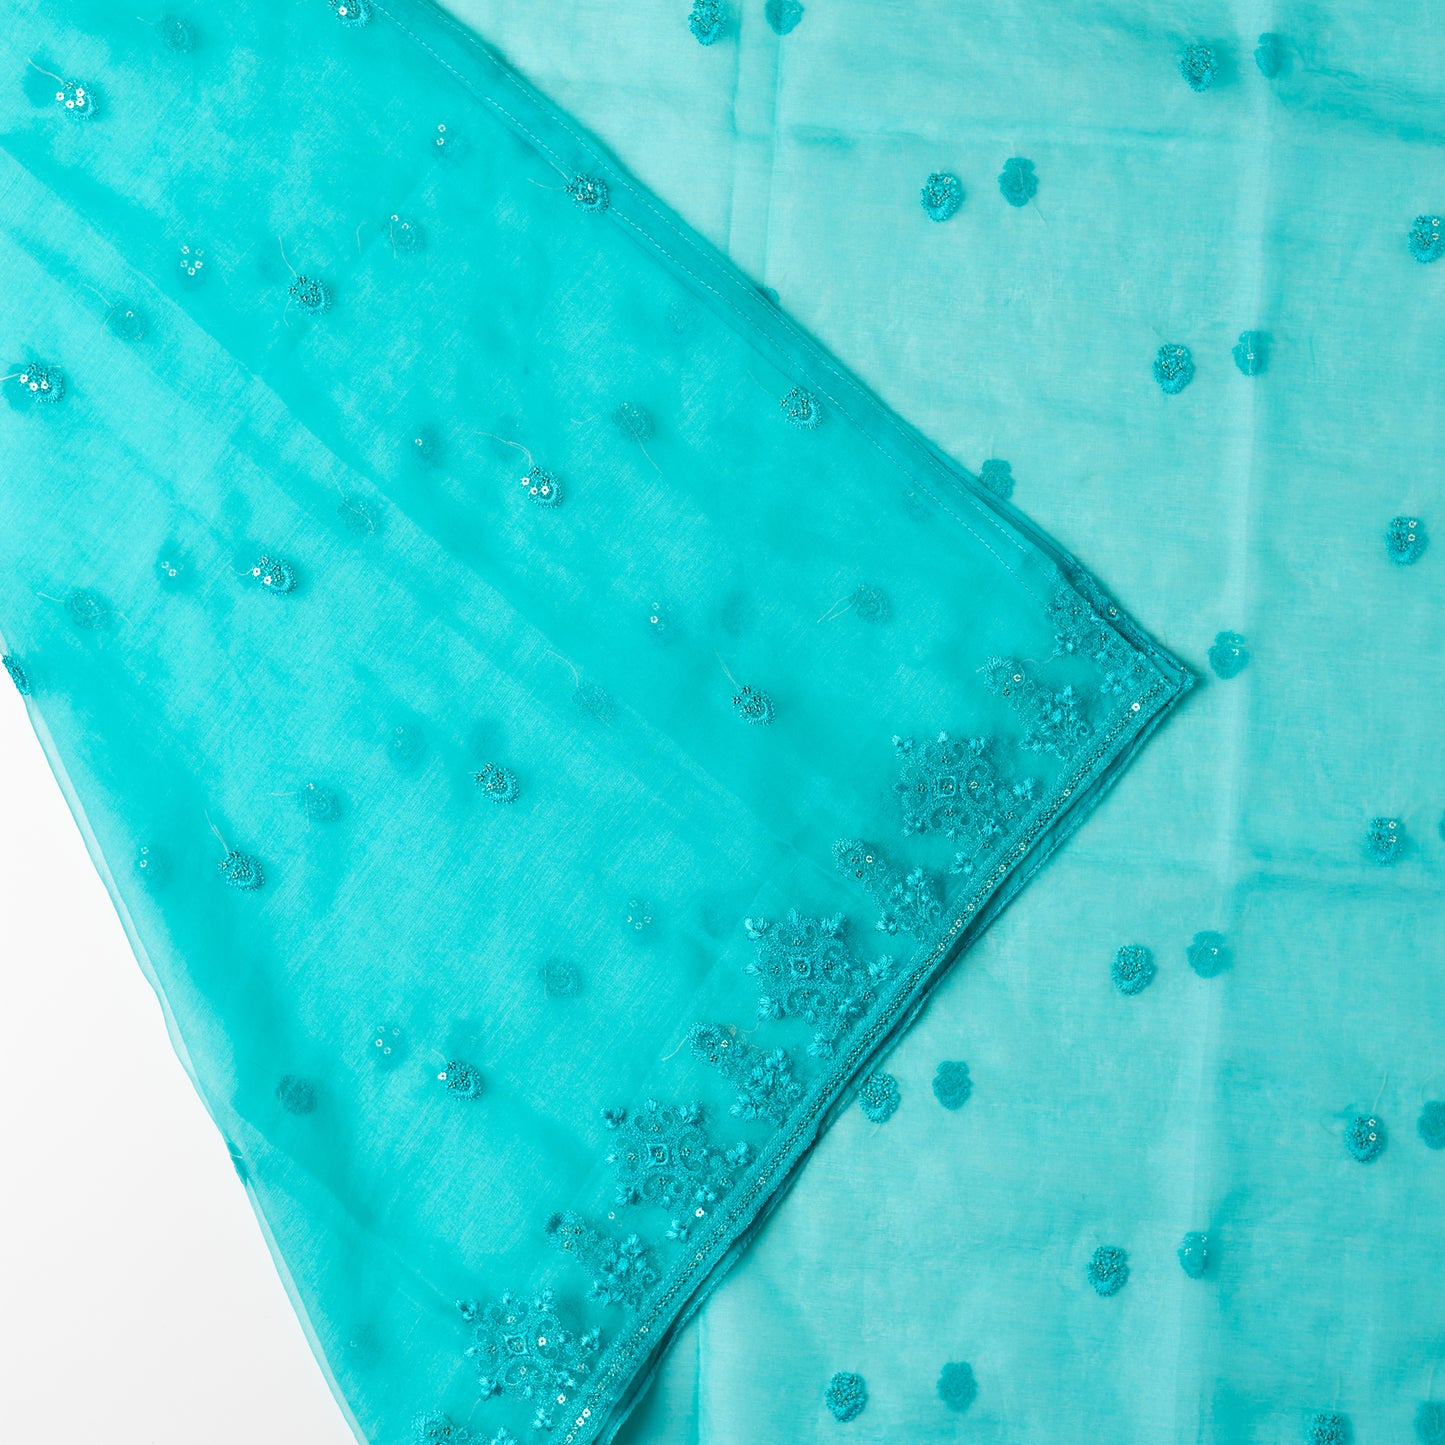 Tissue silk dupatta with elegant embroidery and sequins work all over dupatta and at the borders.